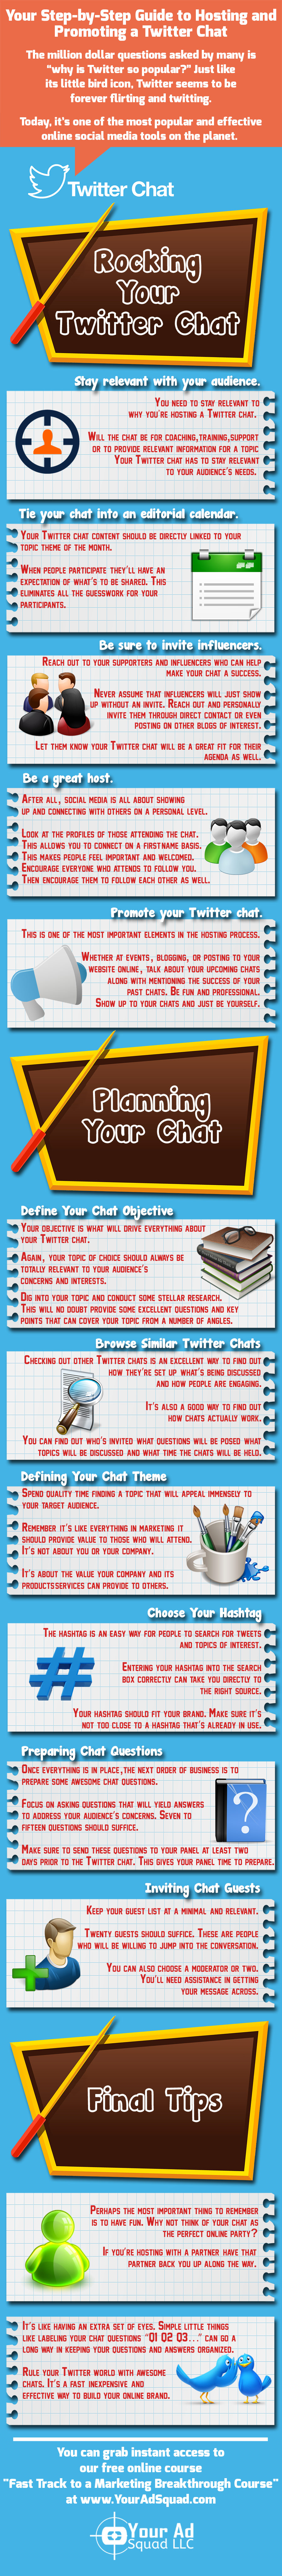 Step-by-Step Guide to Hosting and Promoting a Twitter Chat